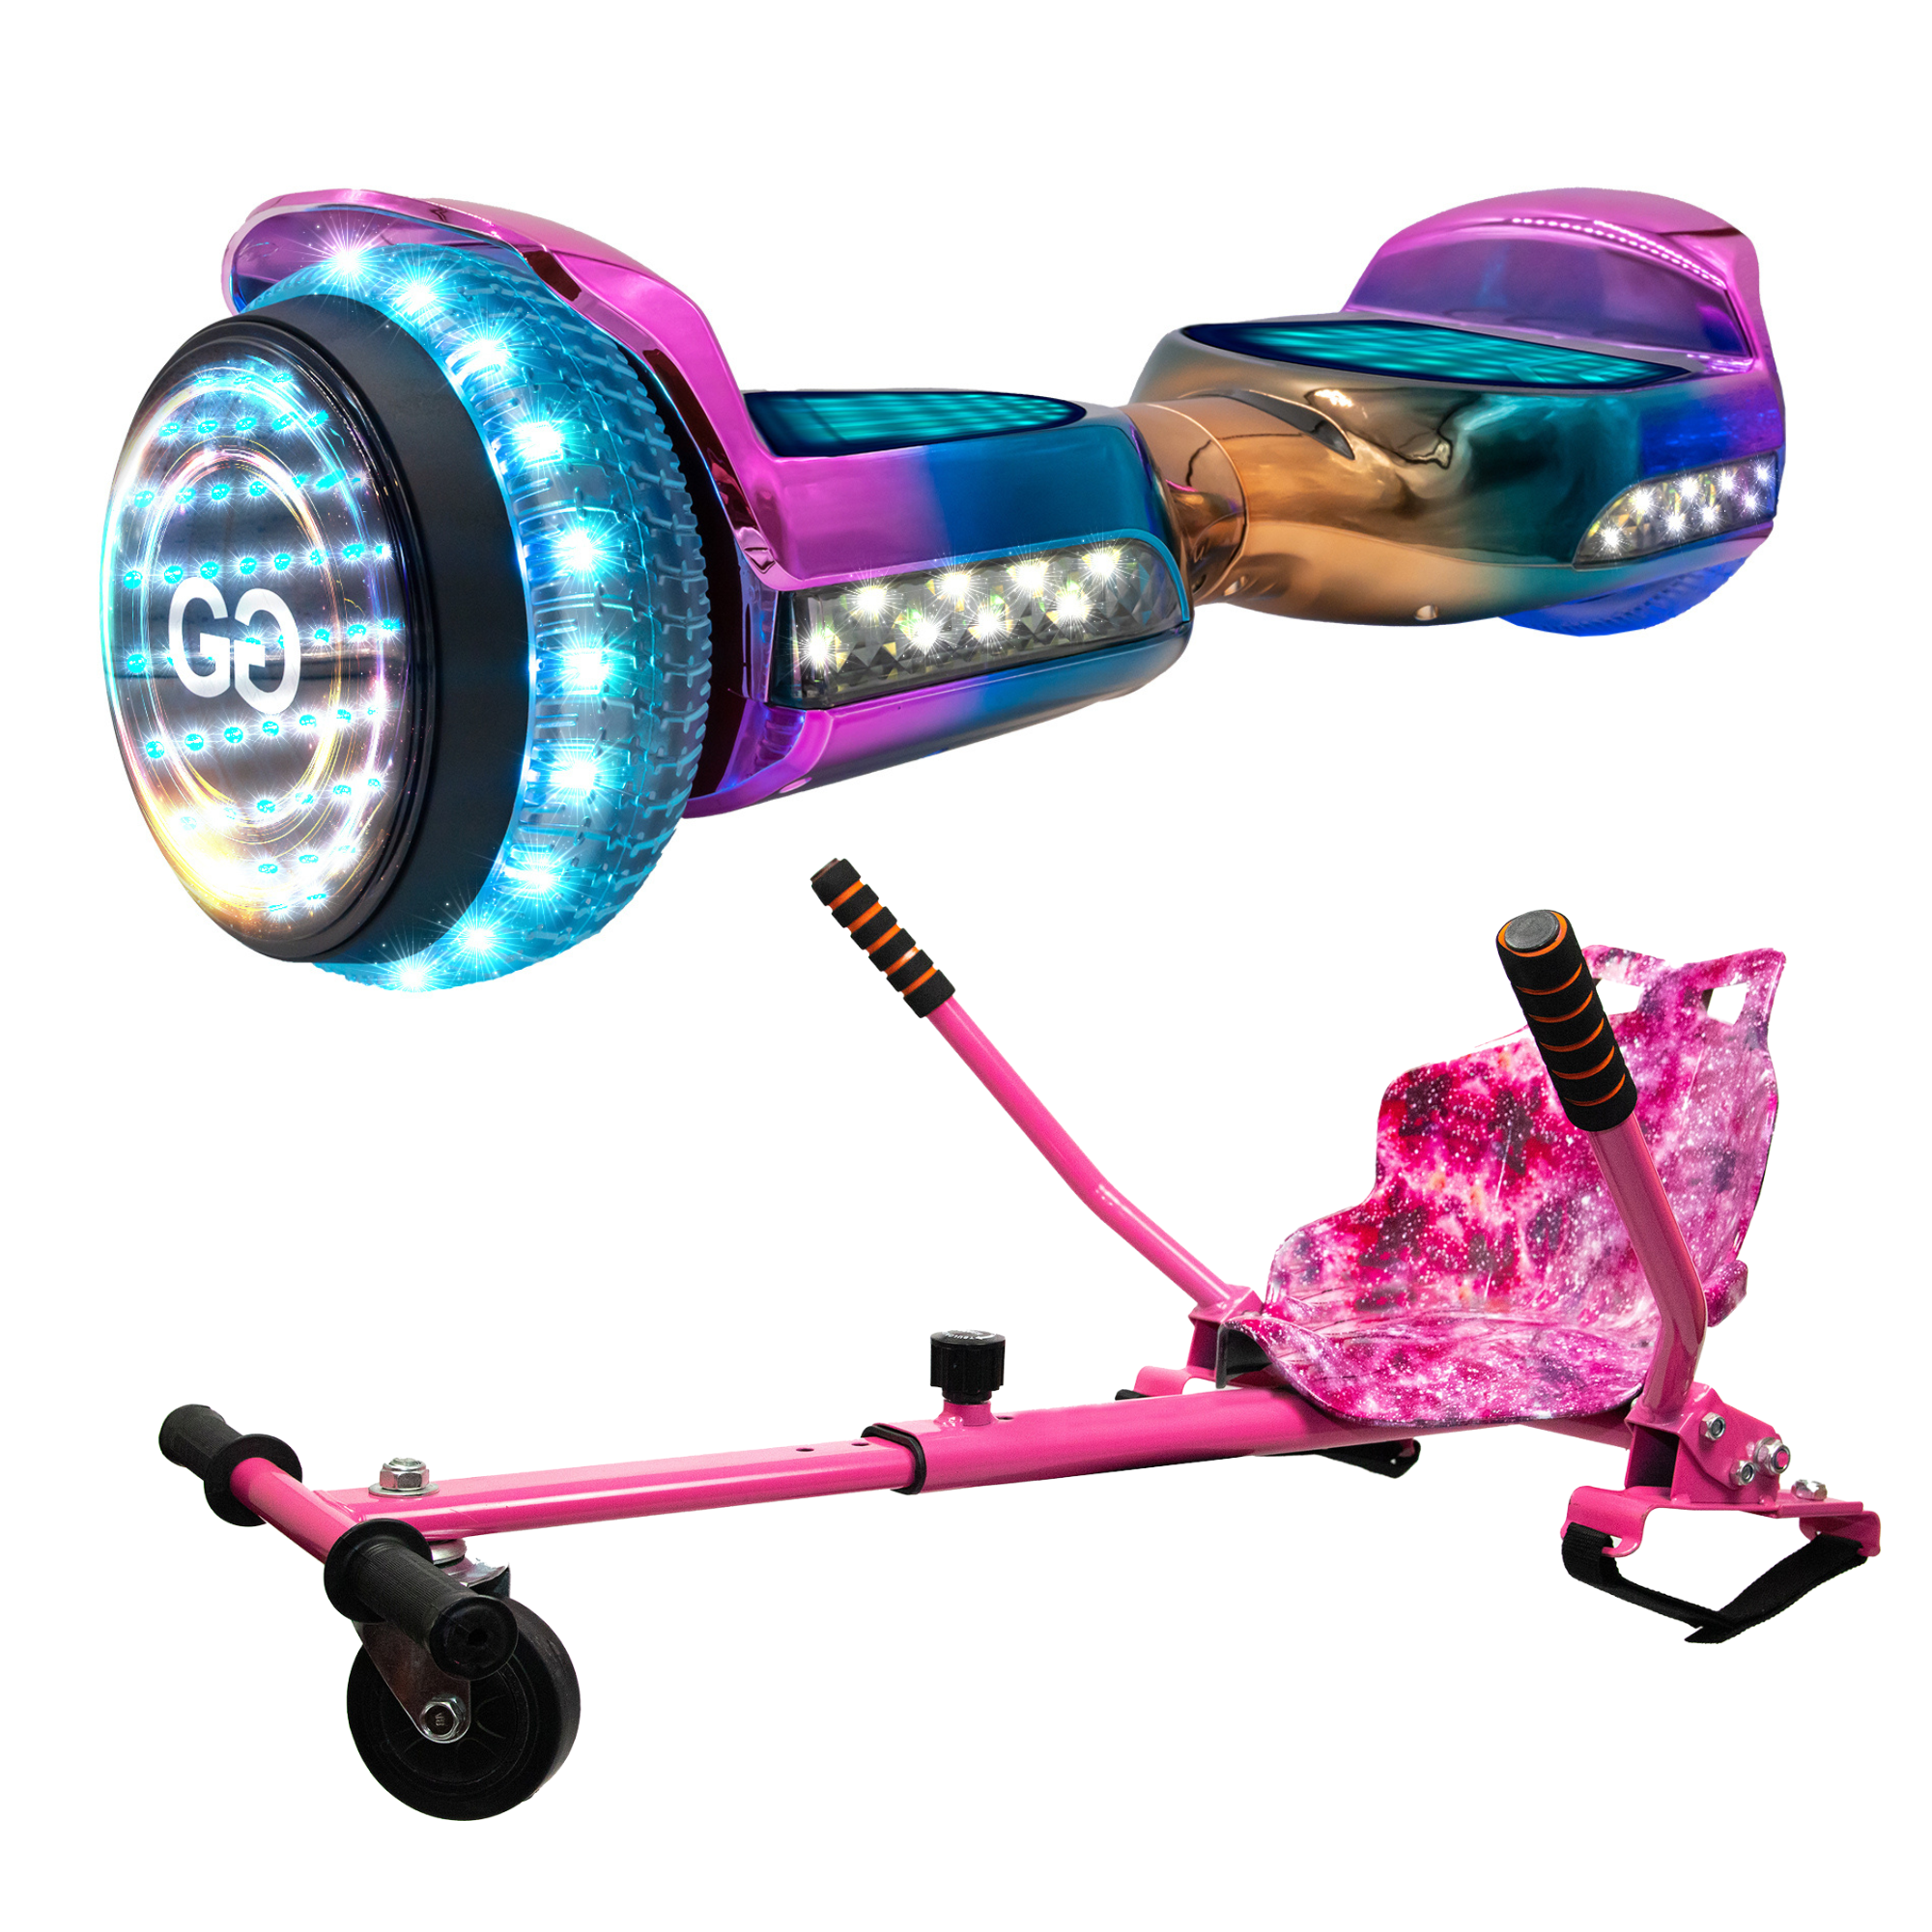 Colorful hoverboard with LED lights and pink Hoverkart attachment highlighting versatile design for outdoor activities.